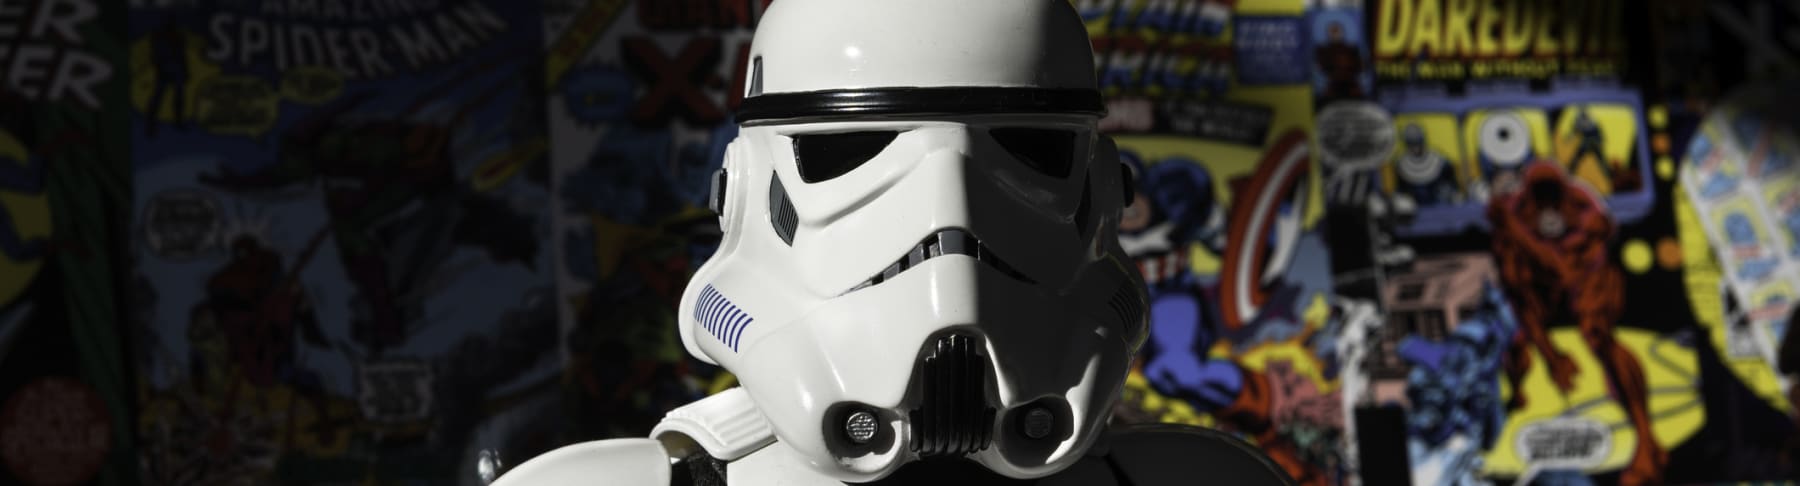 Star Wars Stormtrooper action figure stands in front of comic book wall.